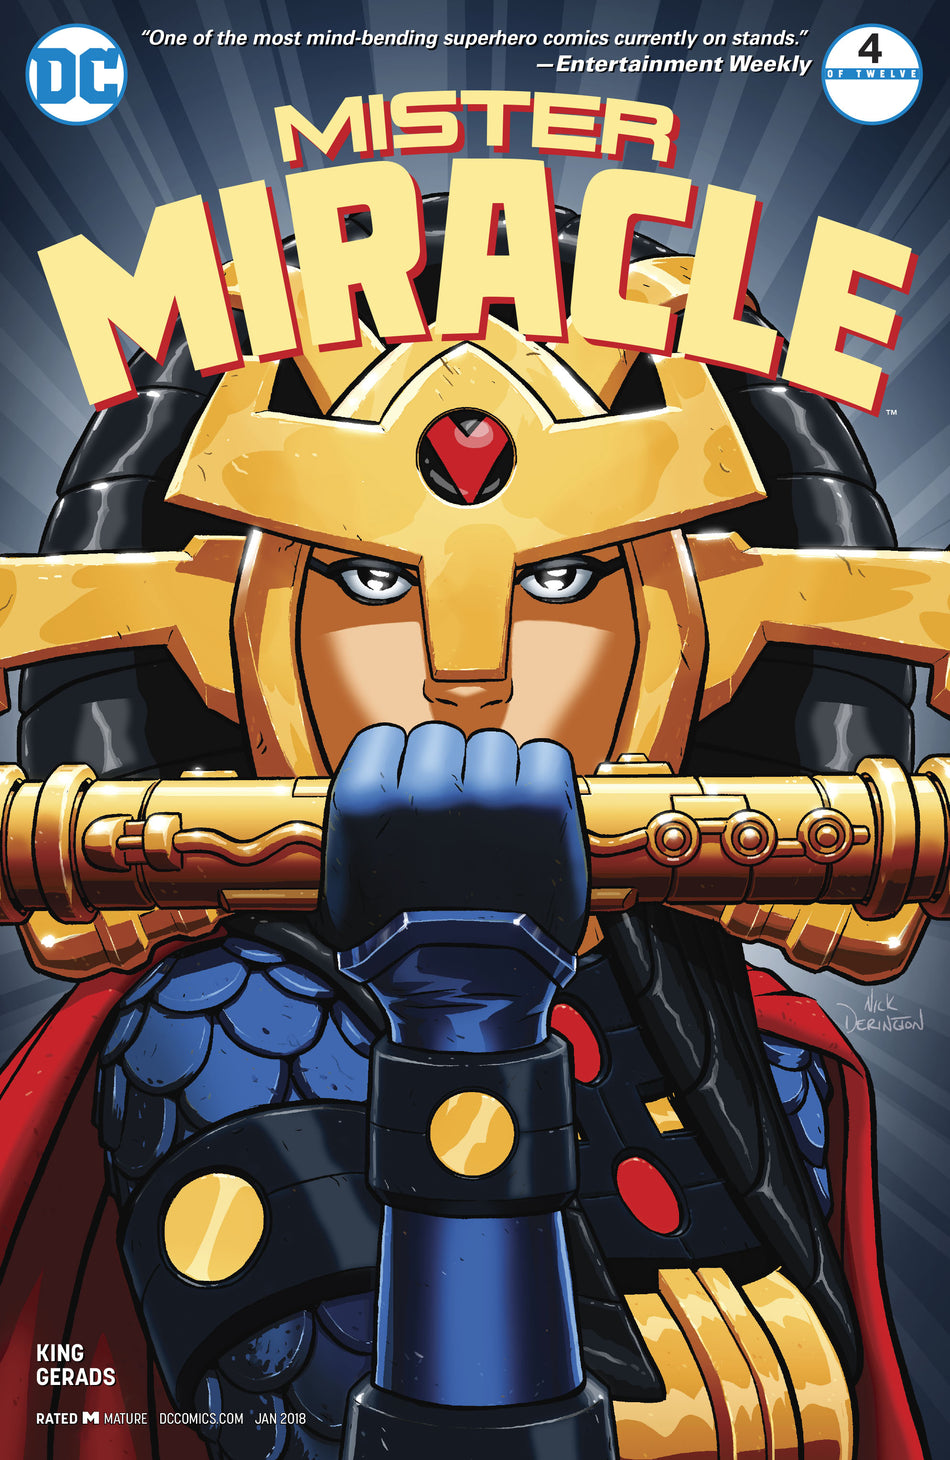 Photo of Mister Miracle Issue 4 (of 12) comic sold by Stronghold Collectibles